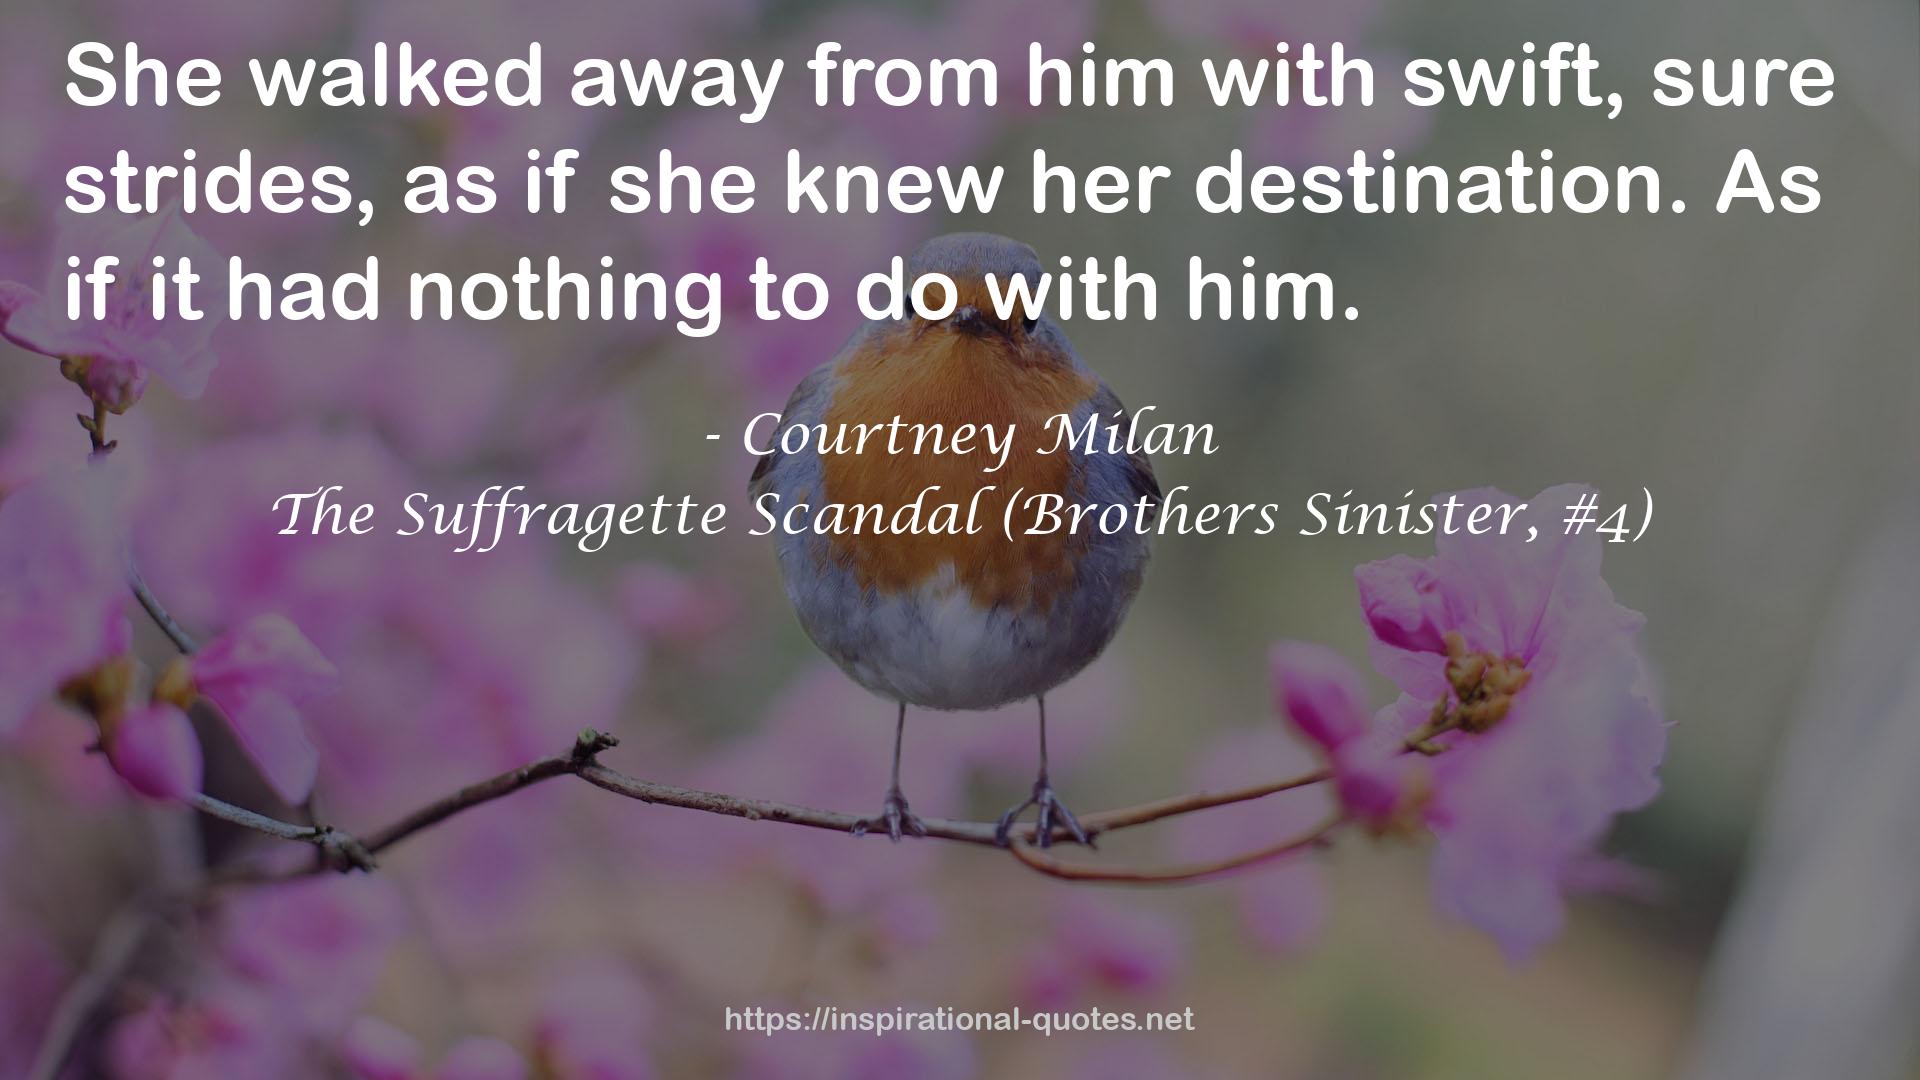 Courtney Milan QUOTES